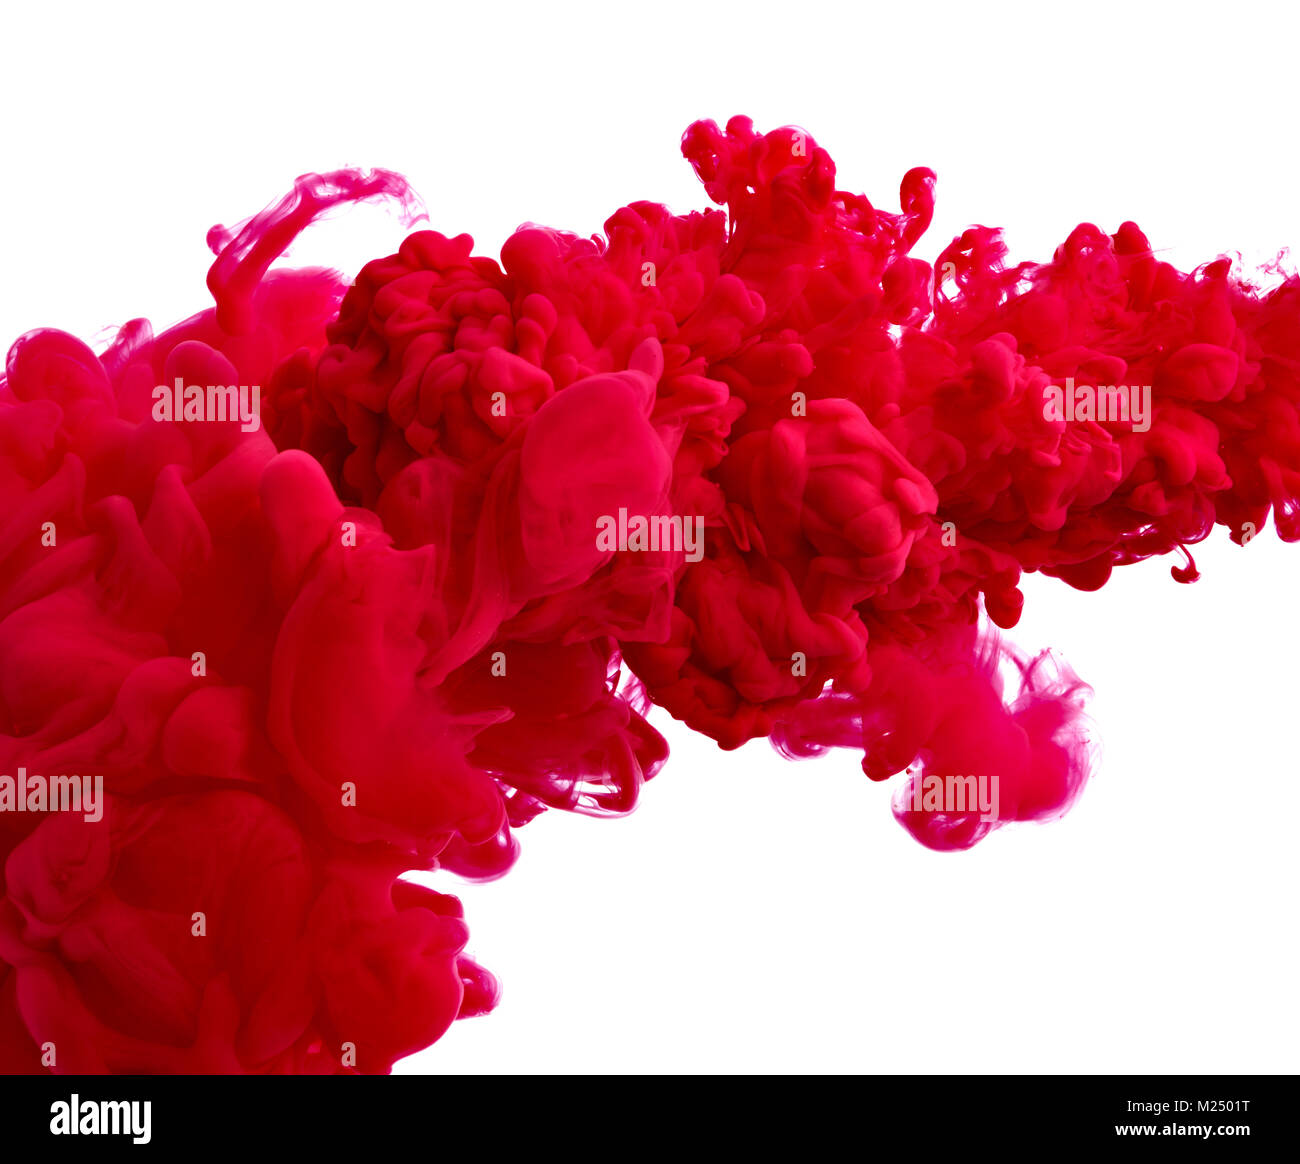 red color paint pouring in water Stock Photo - Alamy